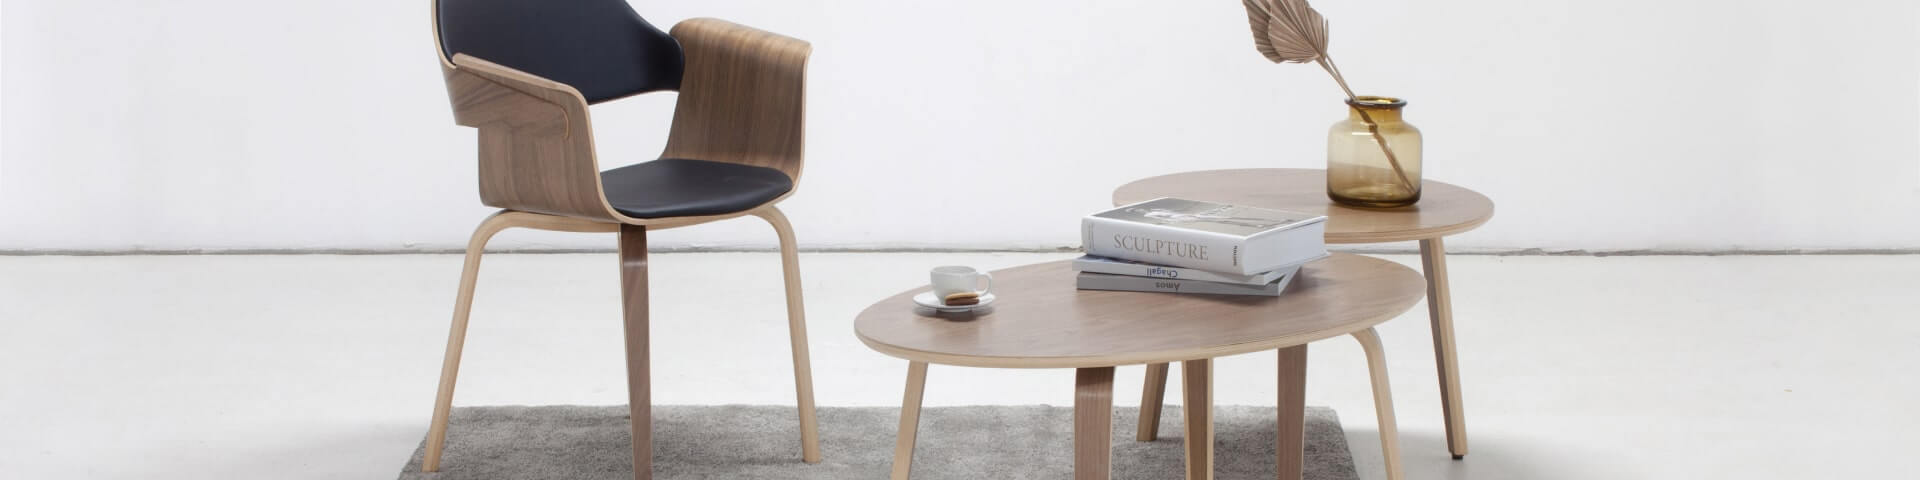 Plydesign's SUBMARINE Coffee Table: Stylish, functional, and versatile addition to your living space.